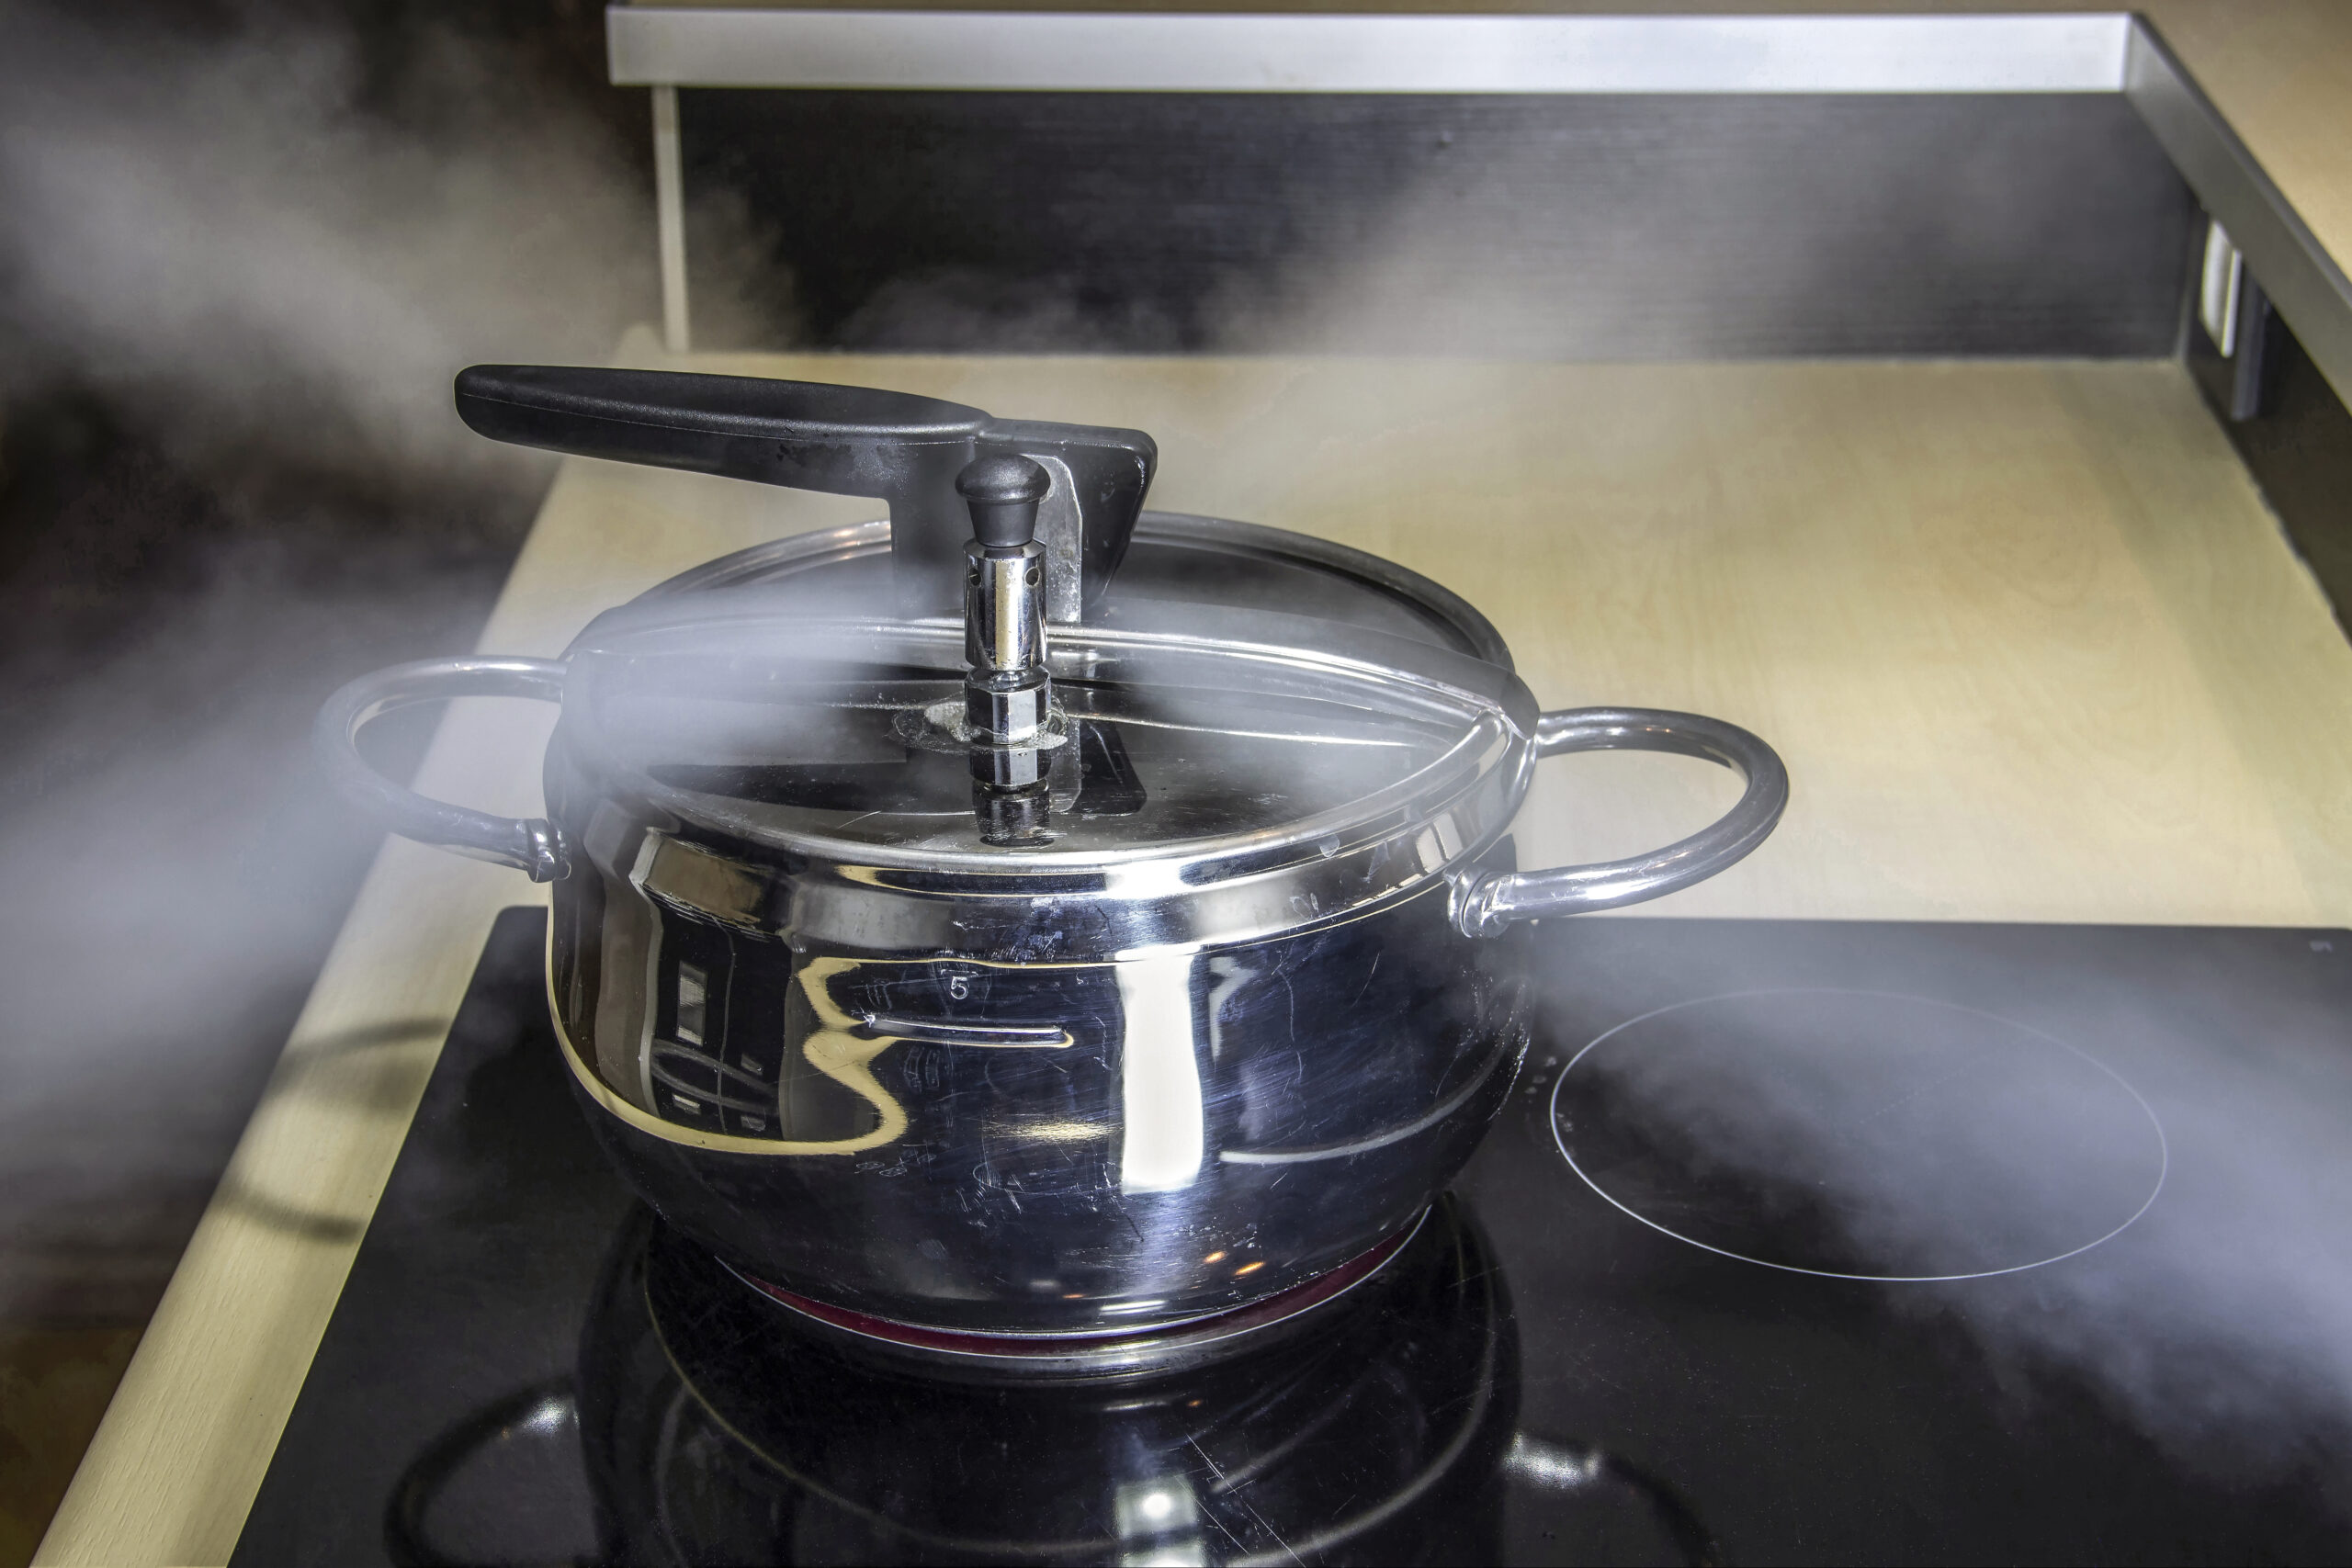 When Should I Replace My Pressure Cooker?